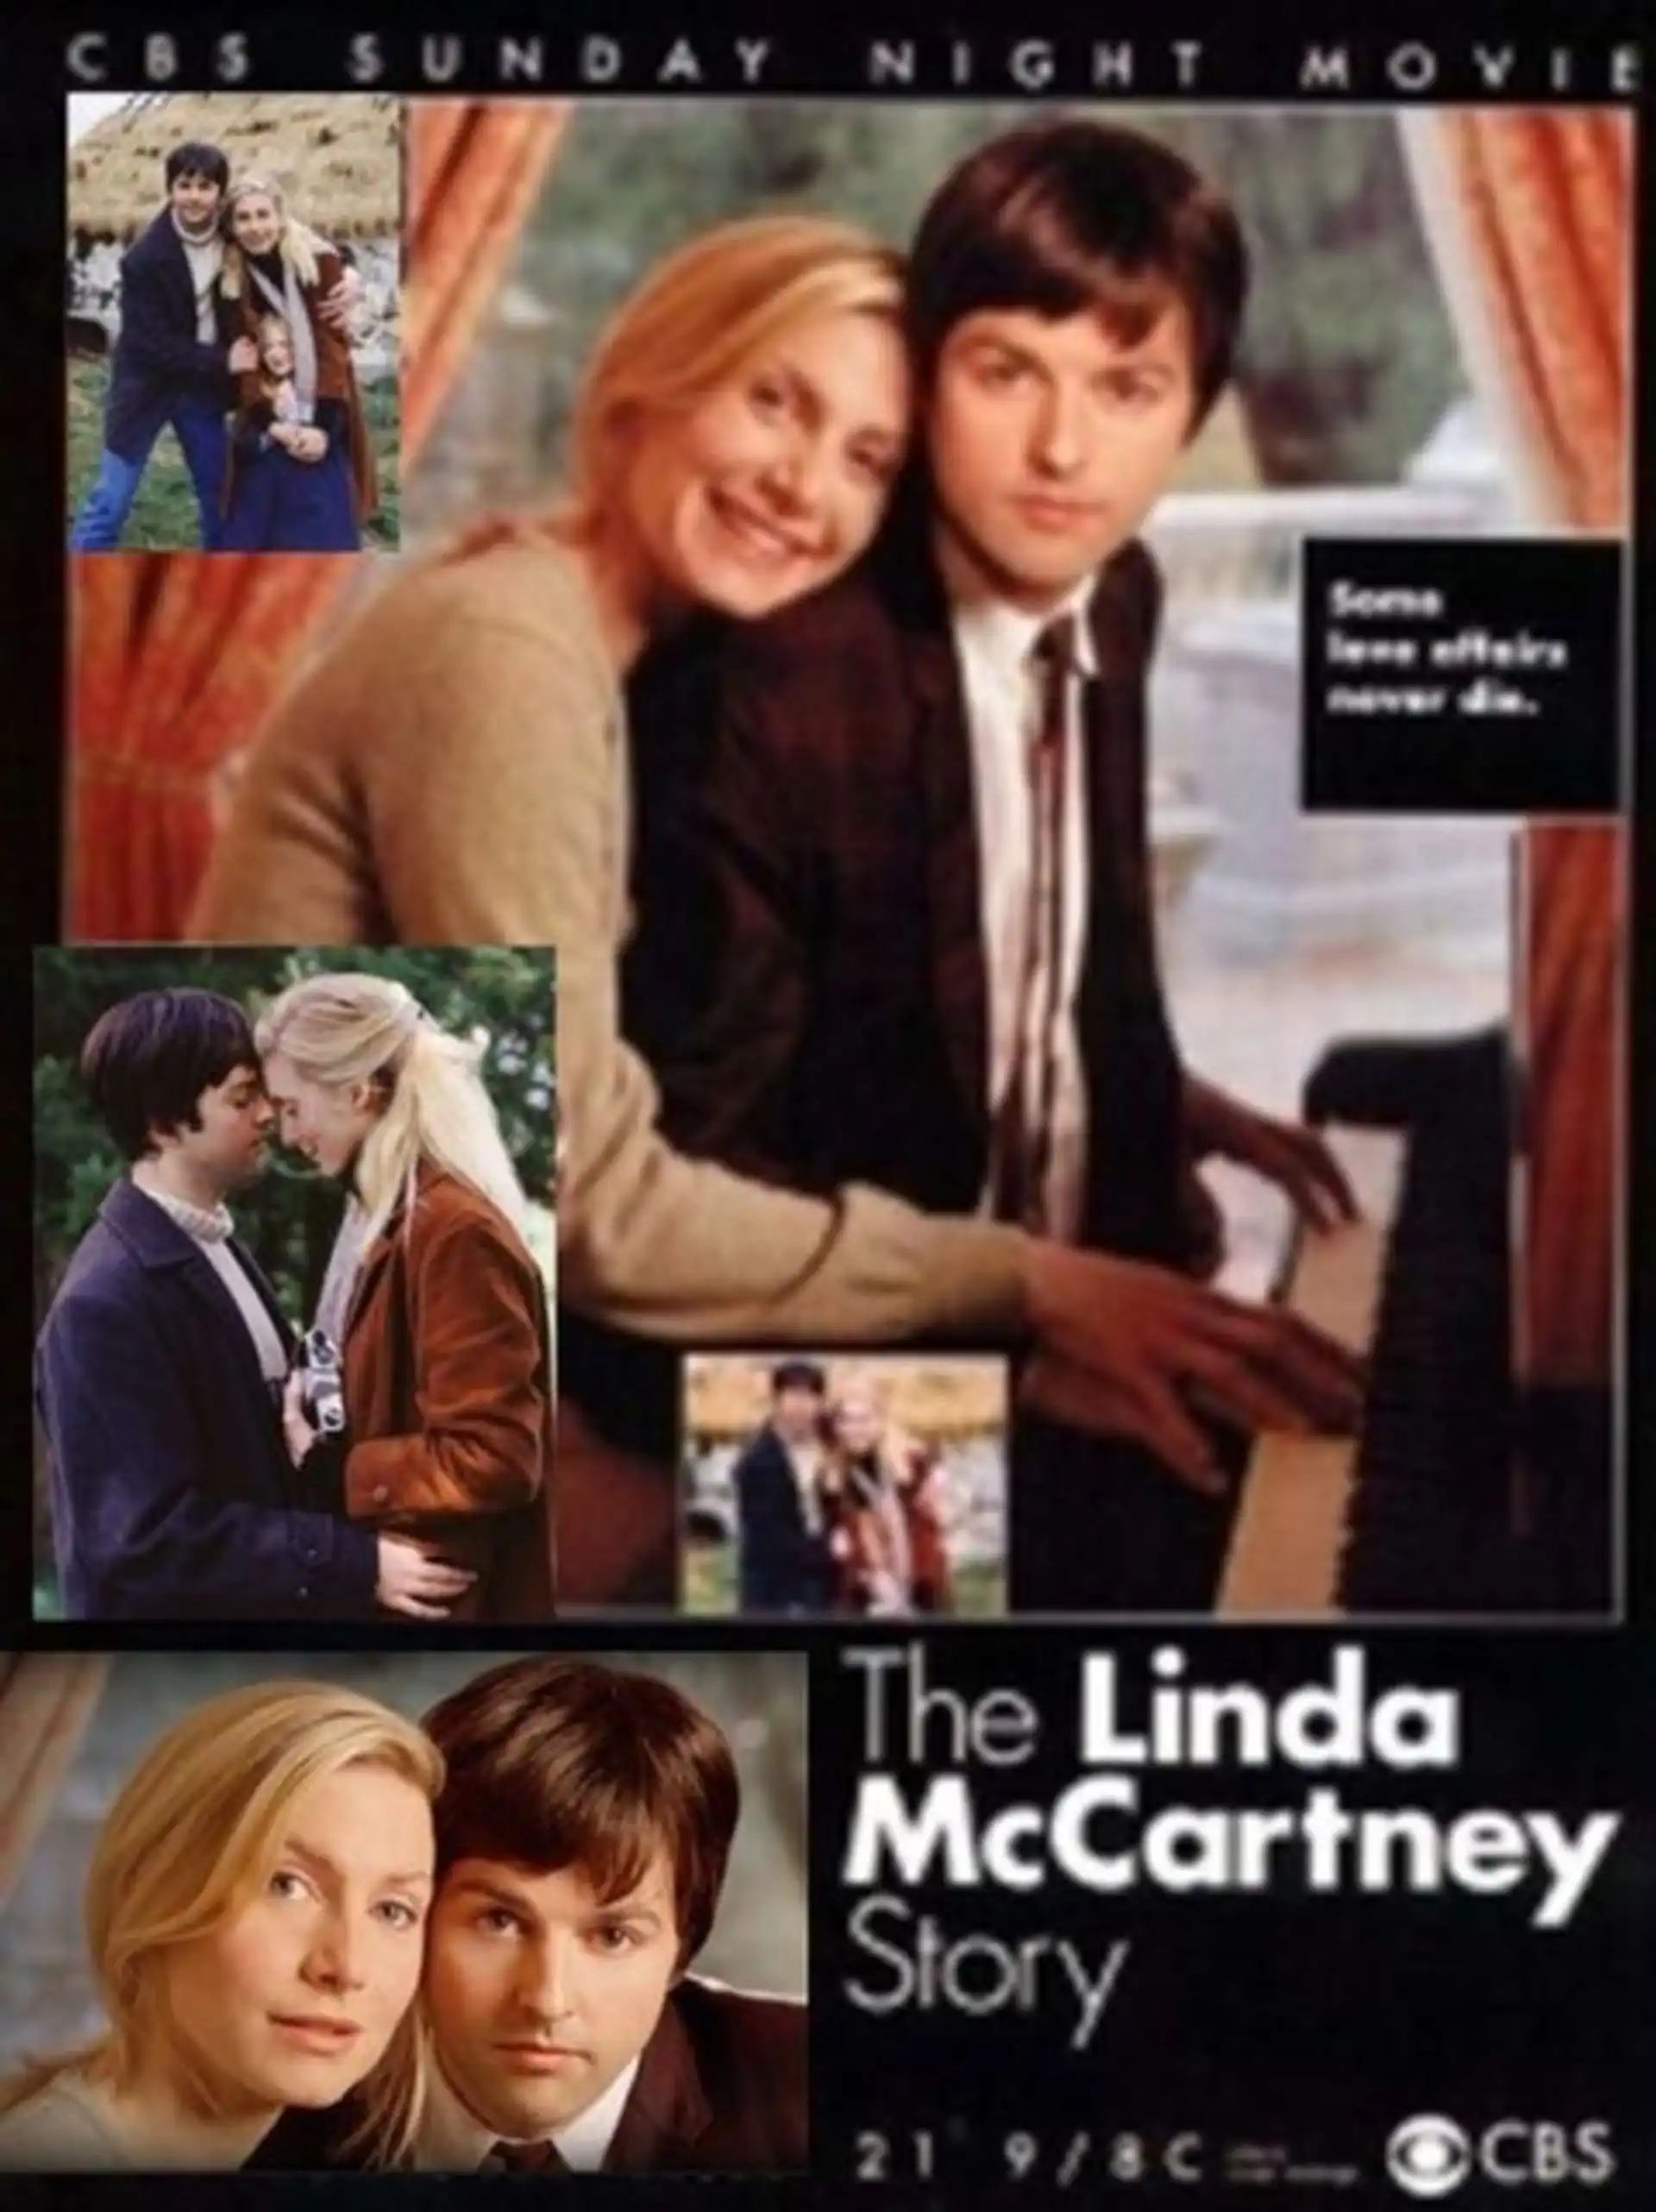 Watch and Download The Linda McCartney Story 2